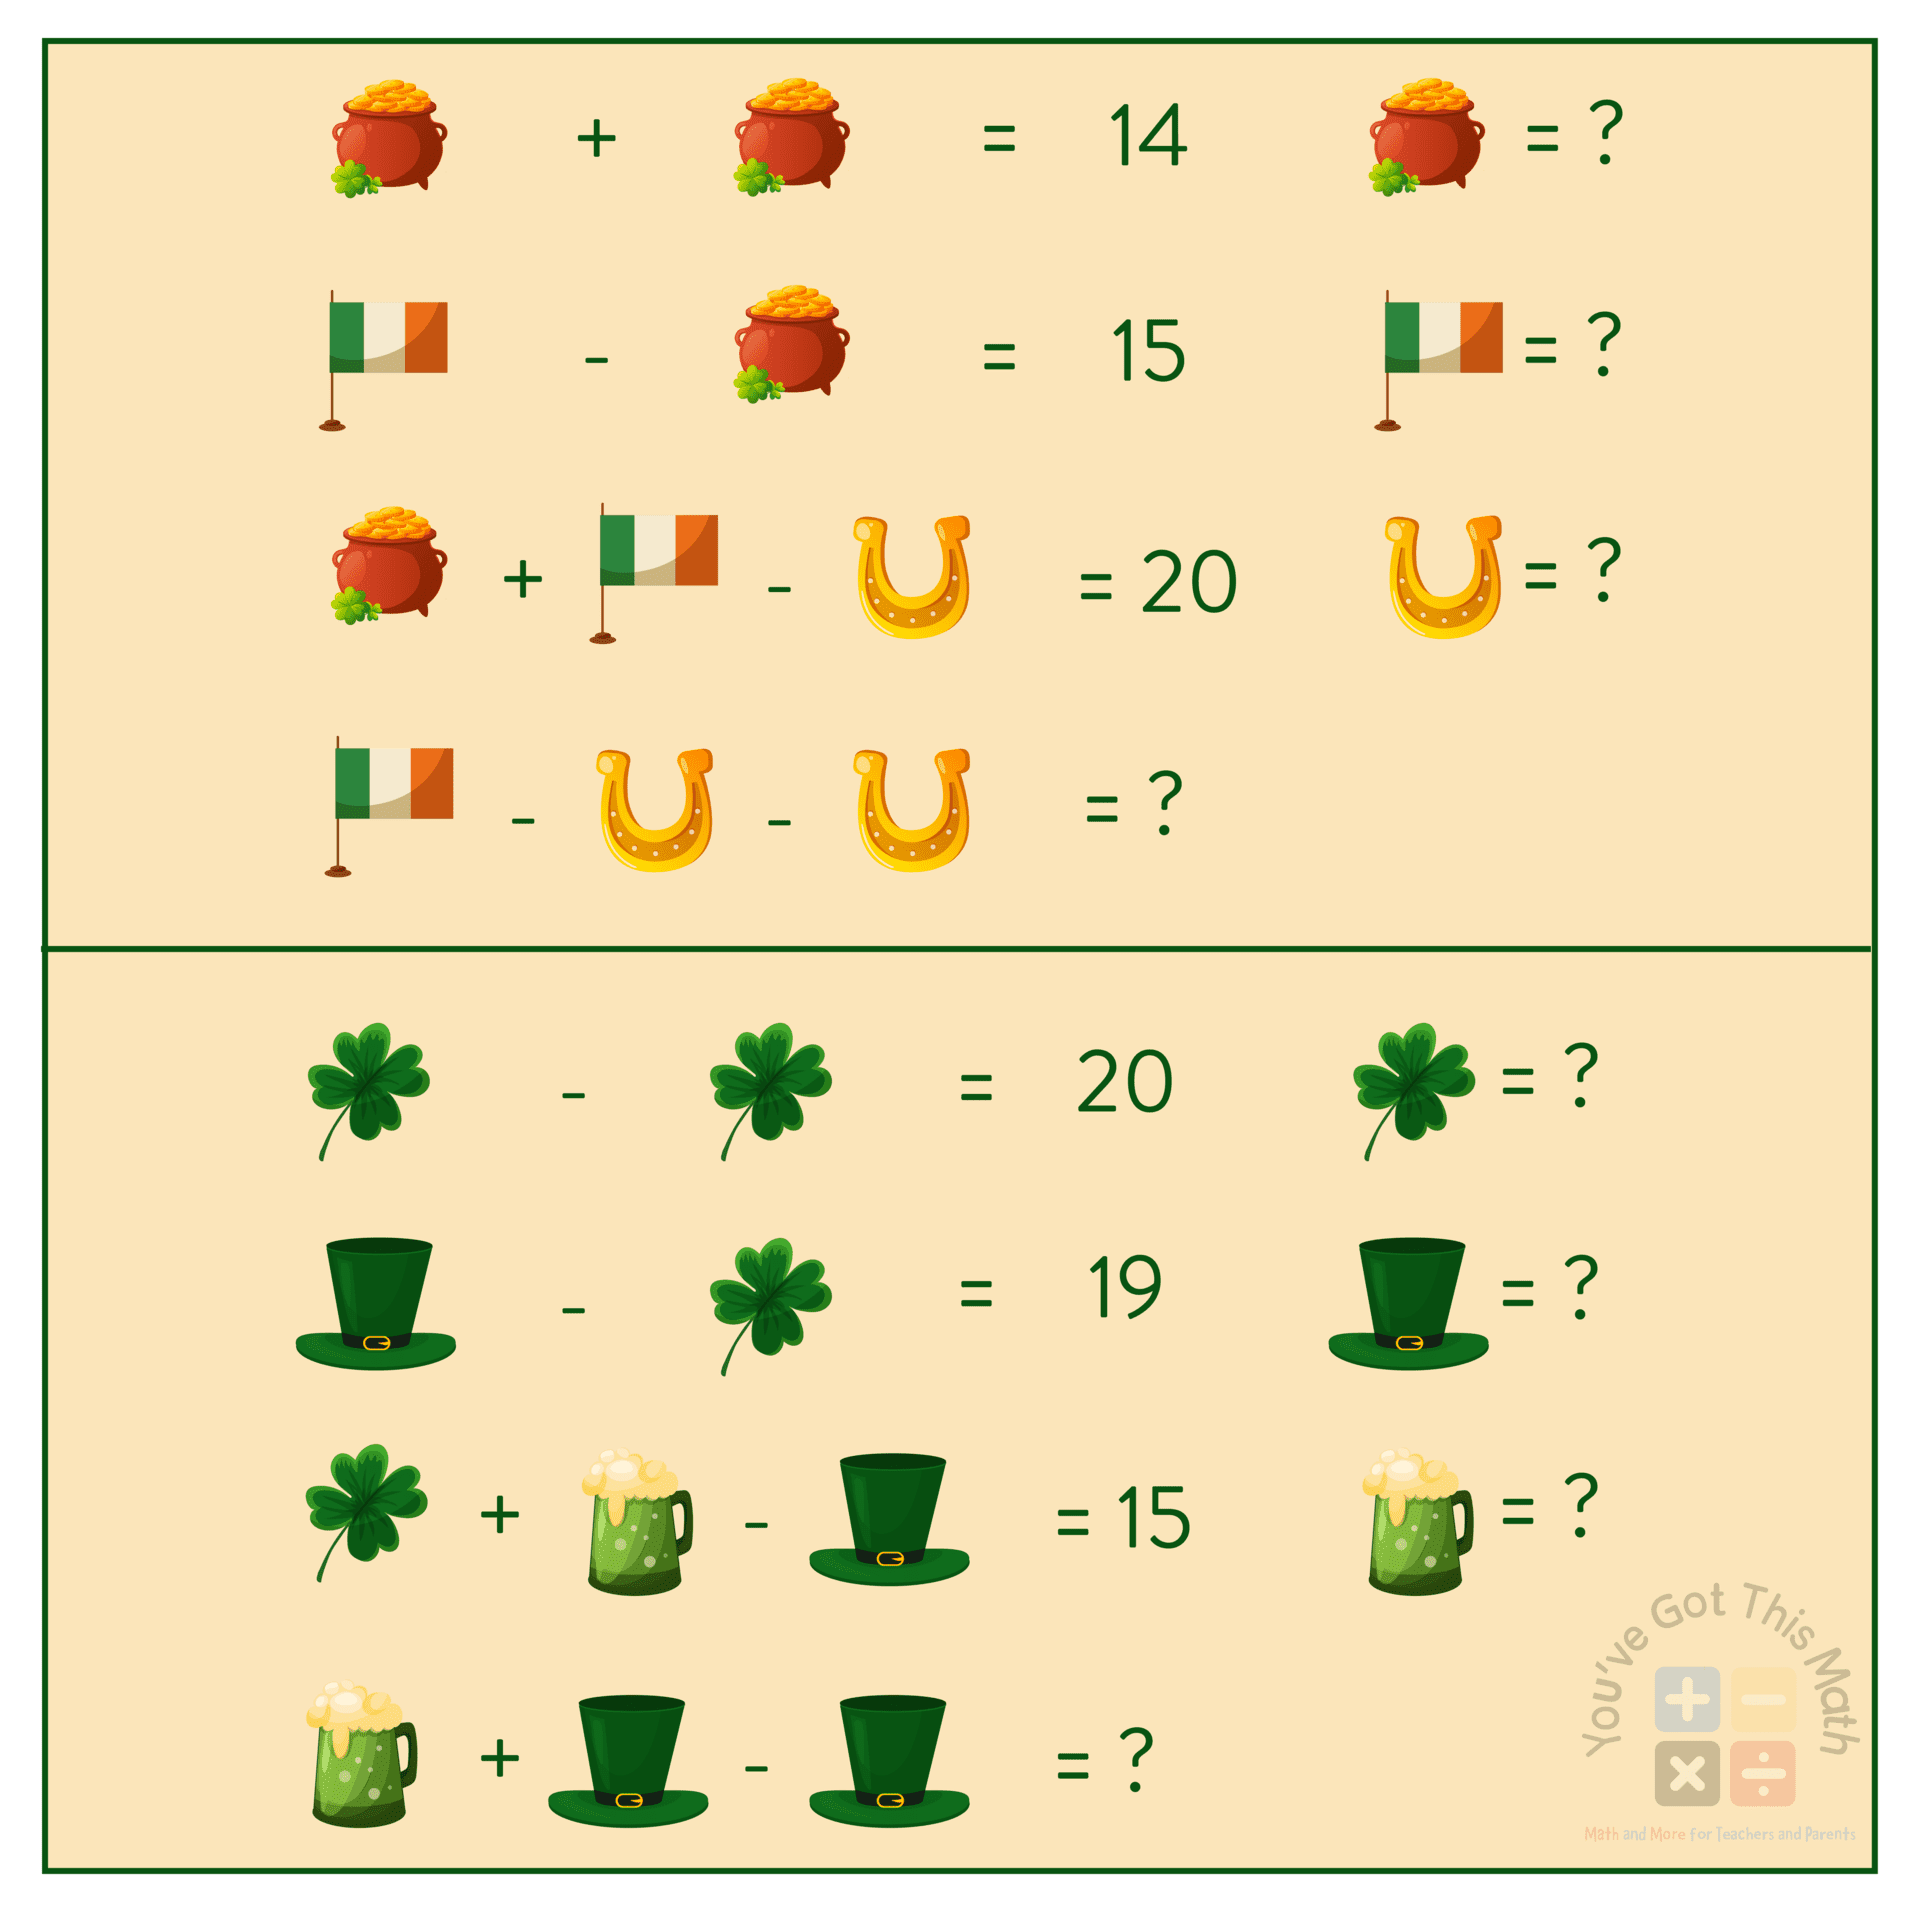 Determining Values of Different St. Patrick's Day Elements